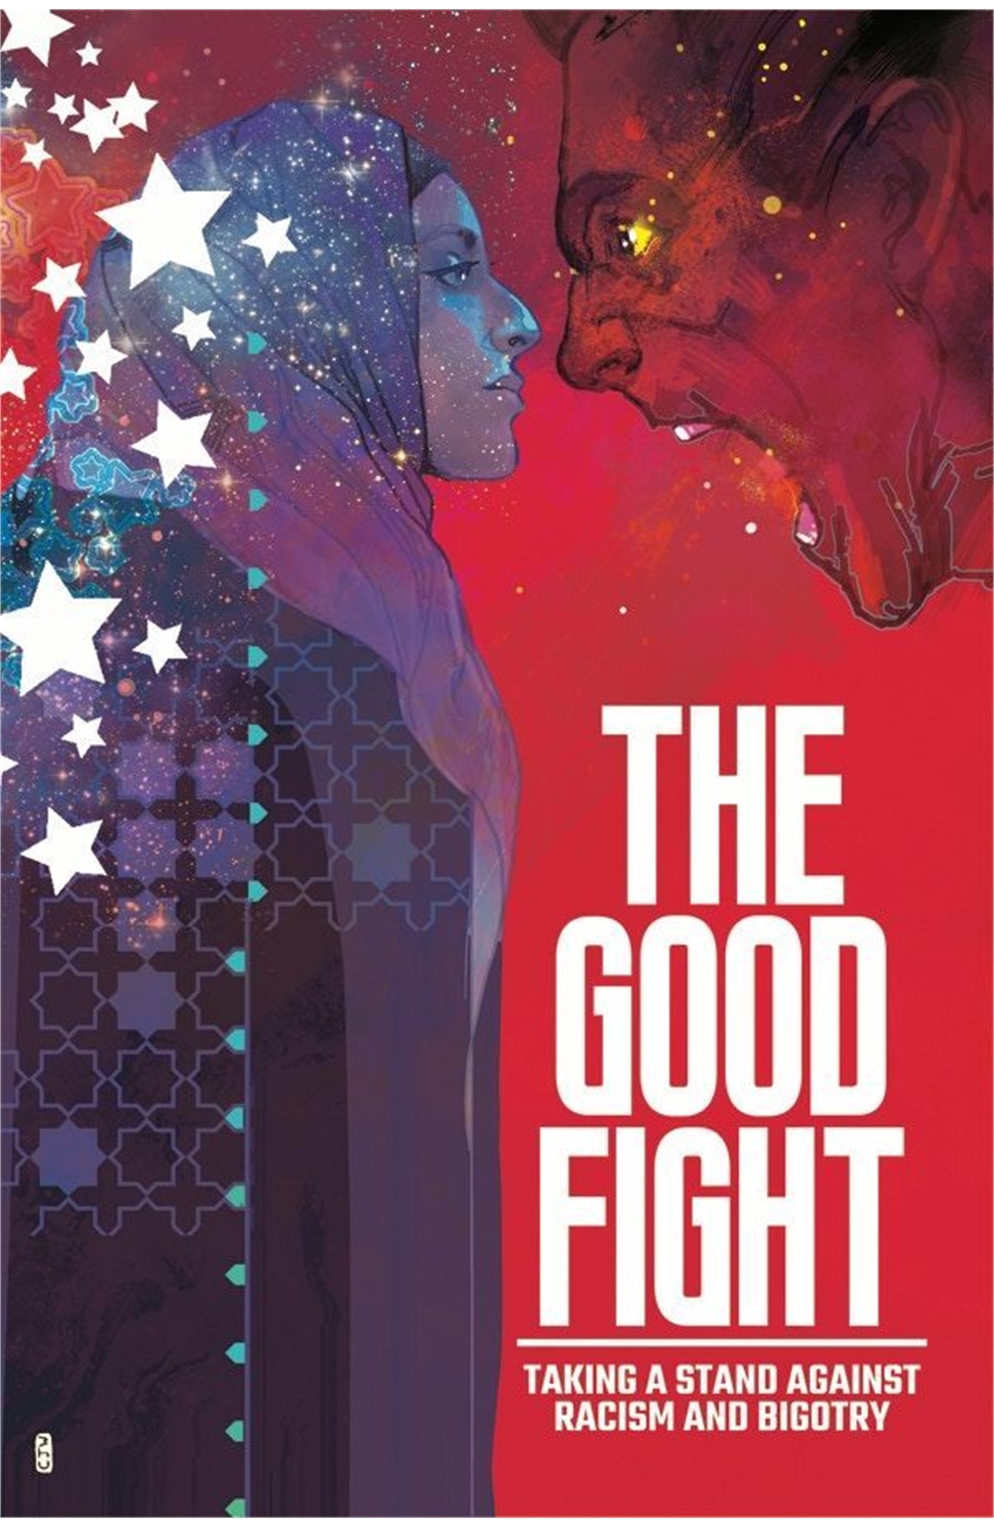 The Good Fight: Taking A Stand Against Racism And Bigotry